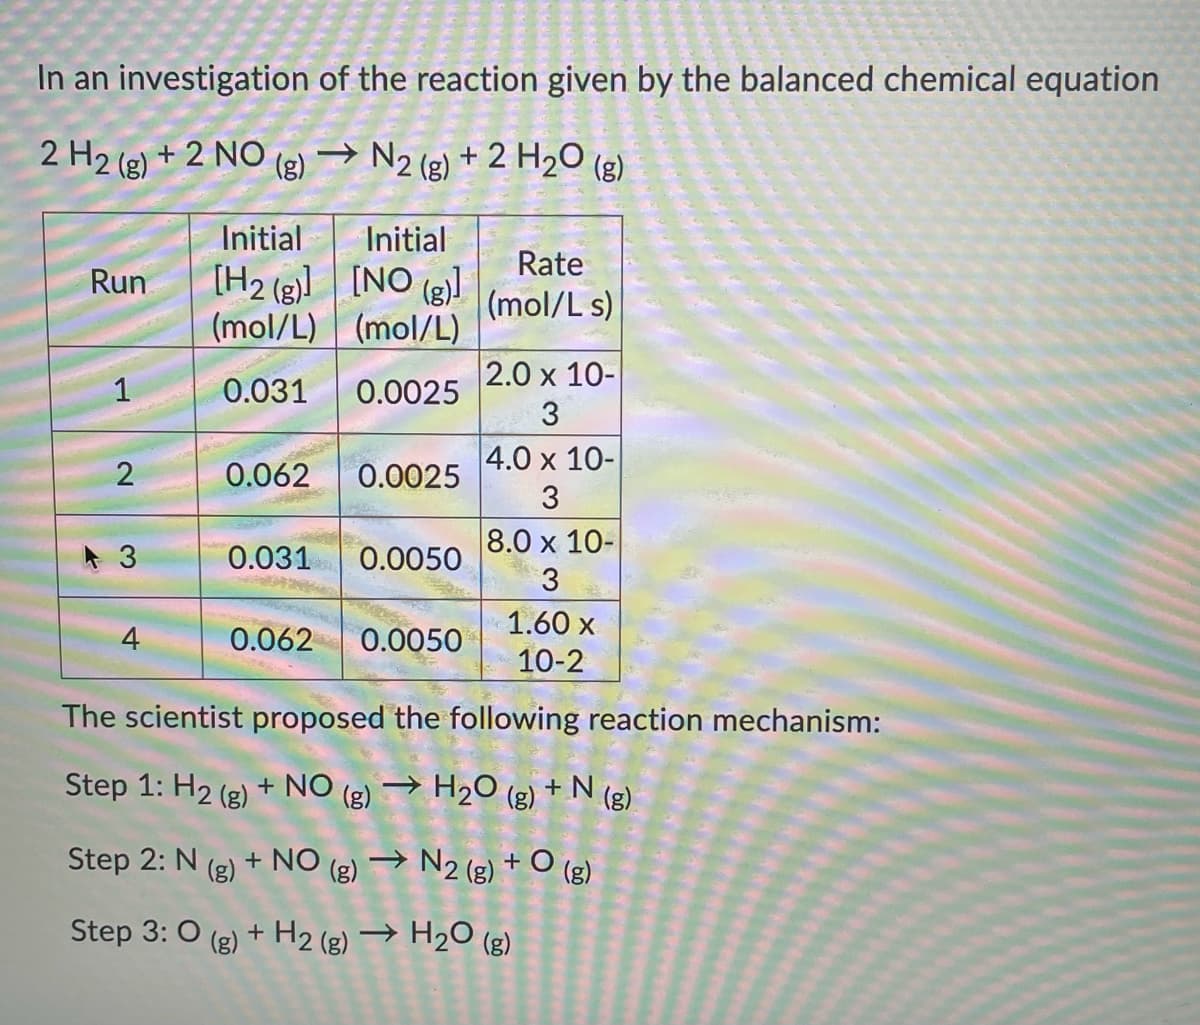 In an investigation of the reaction given by the balanced chemical equation
2 H2 (e) + 2 NO
(g)
→ N2 (g)
+ 2 H2O (g)
Initial
Initial
Rate
[H2 (g)] [NO (2)]l
(mol/L) (mol/L)
Run
(mol/L s)
2.0 x 10-
1
0.031
0.0025
3
4.0 x 10-
0.062
0.0025
8.0 x 10-
0.031
0.0050
3
1.60 x
4
0.062
0.0050
10-2
The scientist proposed the following reaction mechanism:
Step 1: H2 (g)
+ NO (g) → H20 (g) + N (g)
Step 2: N (g)
+ NO (2) → N2 (g) + O (g)
Step 3: 0 (g) + H2 (g) → H2O (g)
